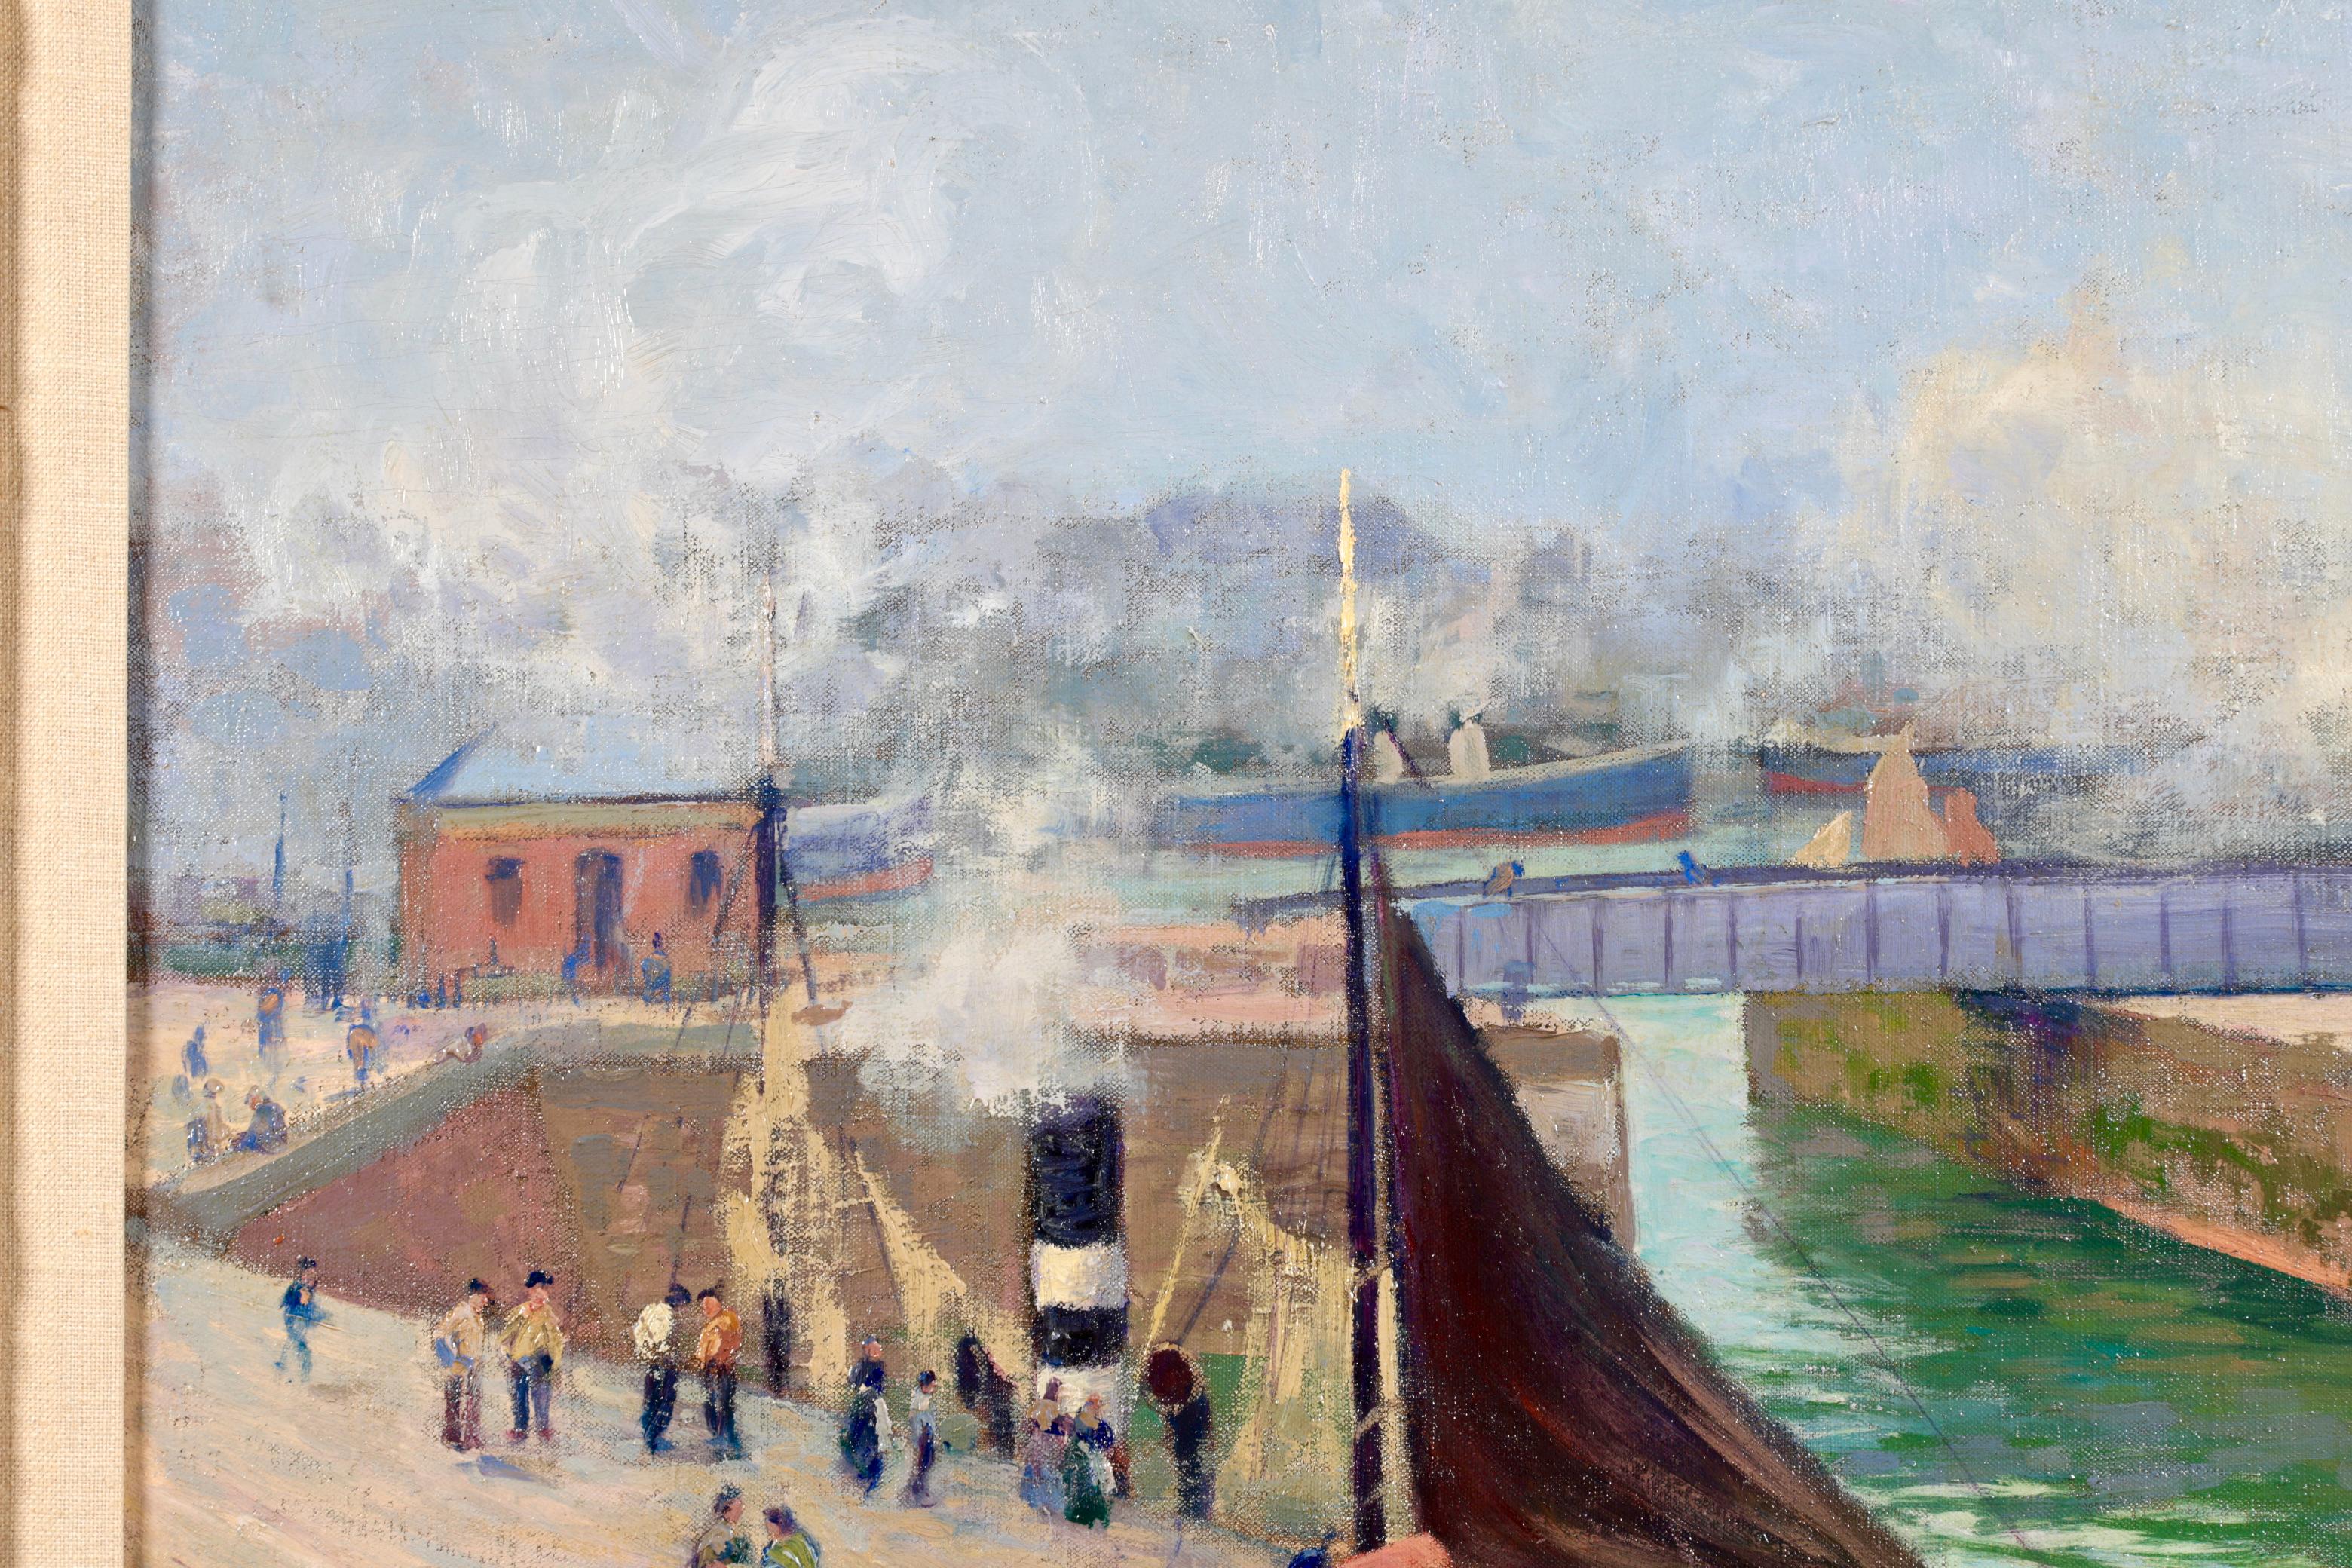 Signed and dated oil on canvas landscape by French post impressionist painter Paul Madeline. This beautiful work depicts the Tournant bridge over the River Arques at the seaport in Dieppe, France. Workers walk around the port beside the sales of a